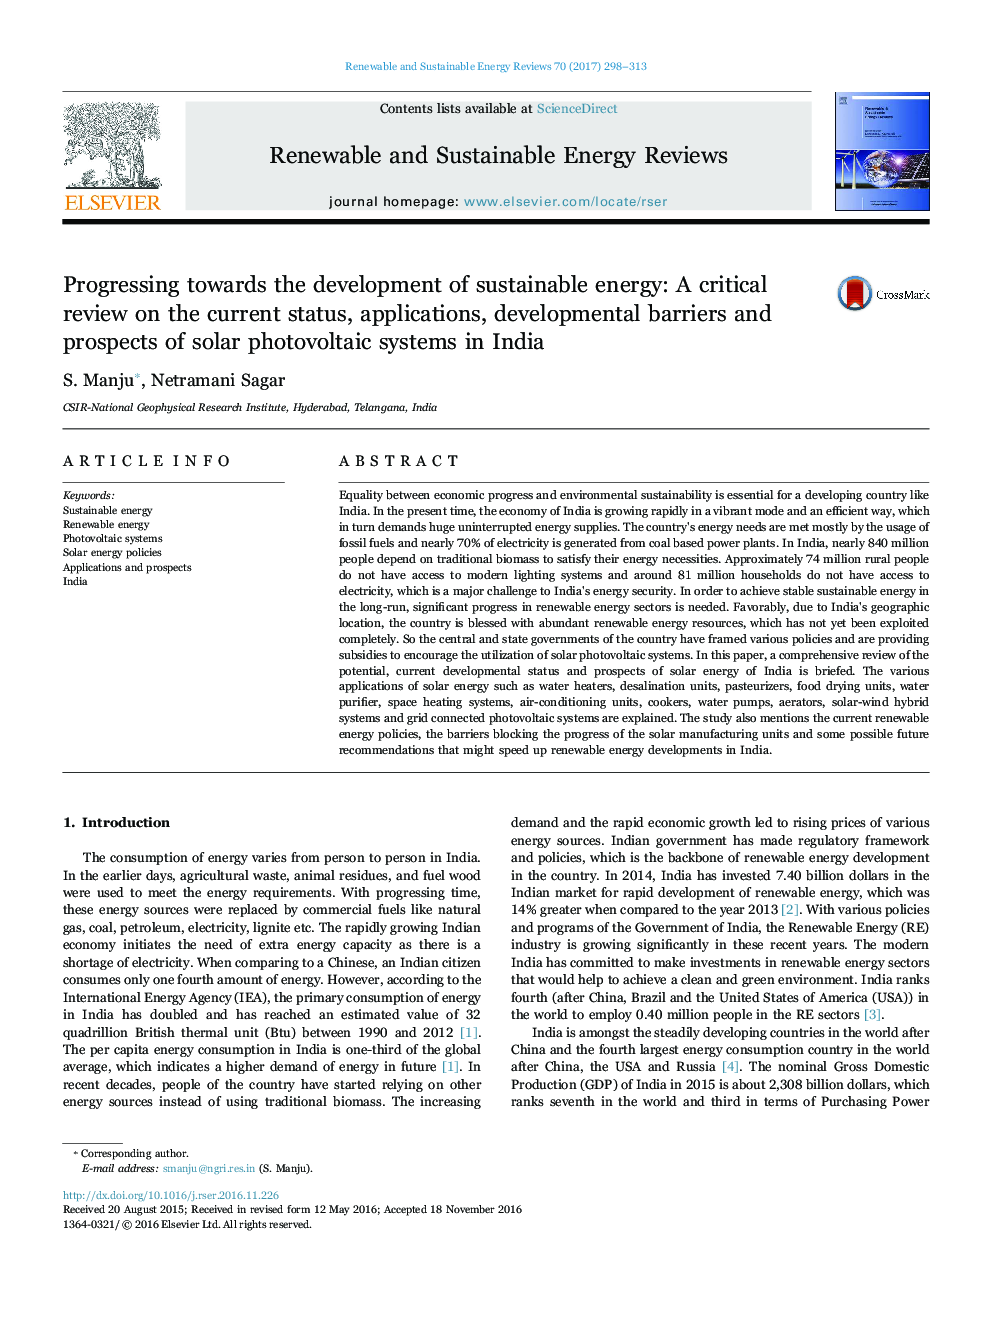 Progressing towards the development of sustainable energy: A critical review on the current status, applications, developmental barriers and prospects of solar photovoltaic systems in India